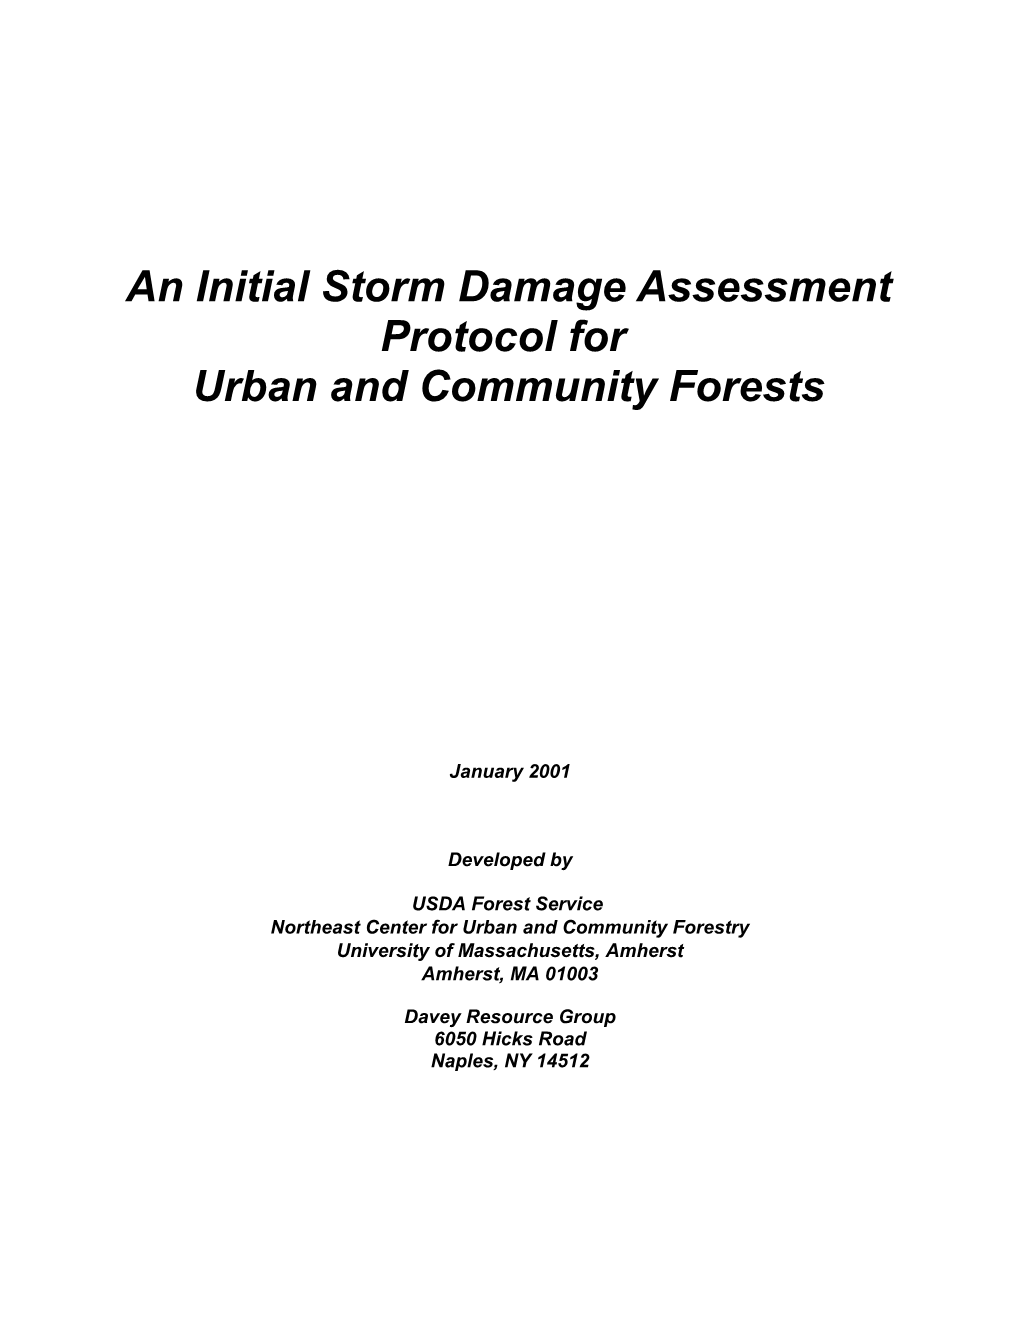 An Initial Storm Damage Assessment Protocol for Urban and Community Forests